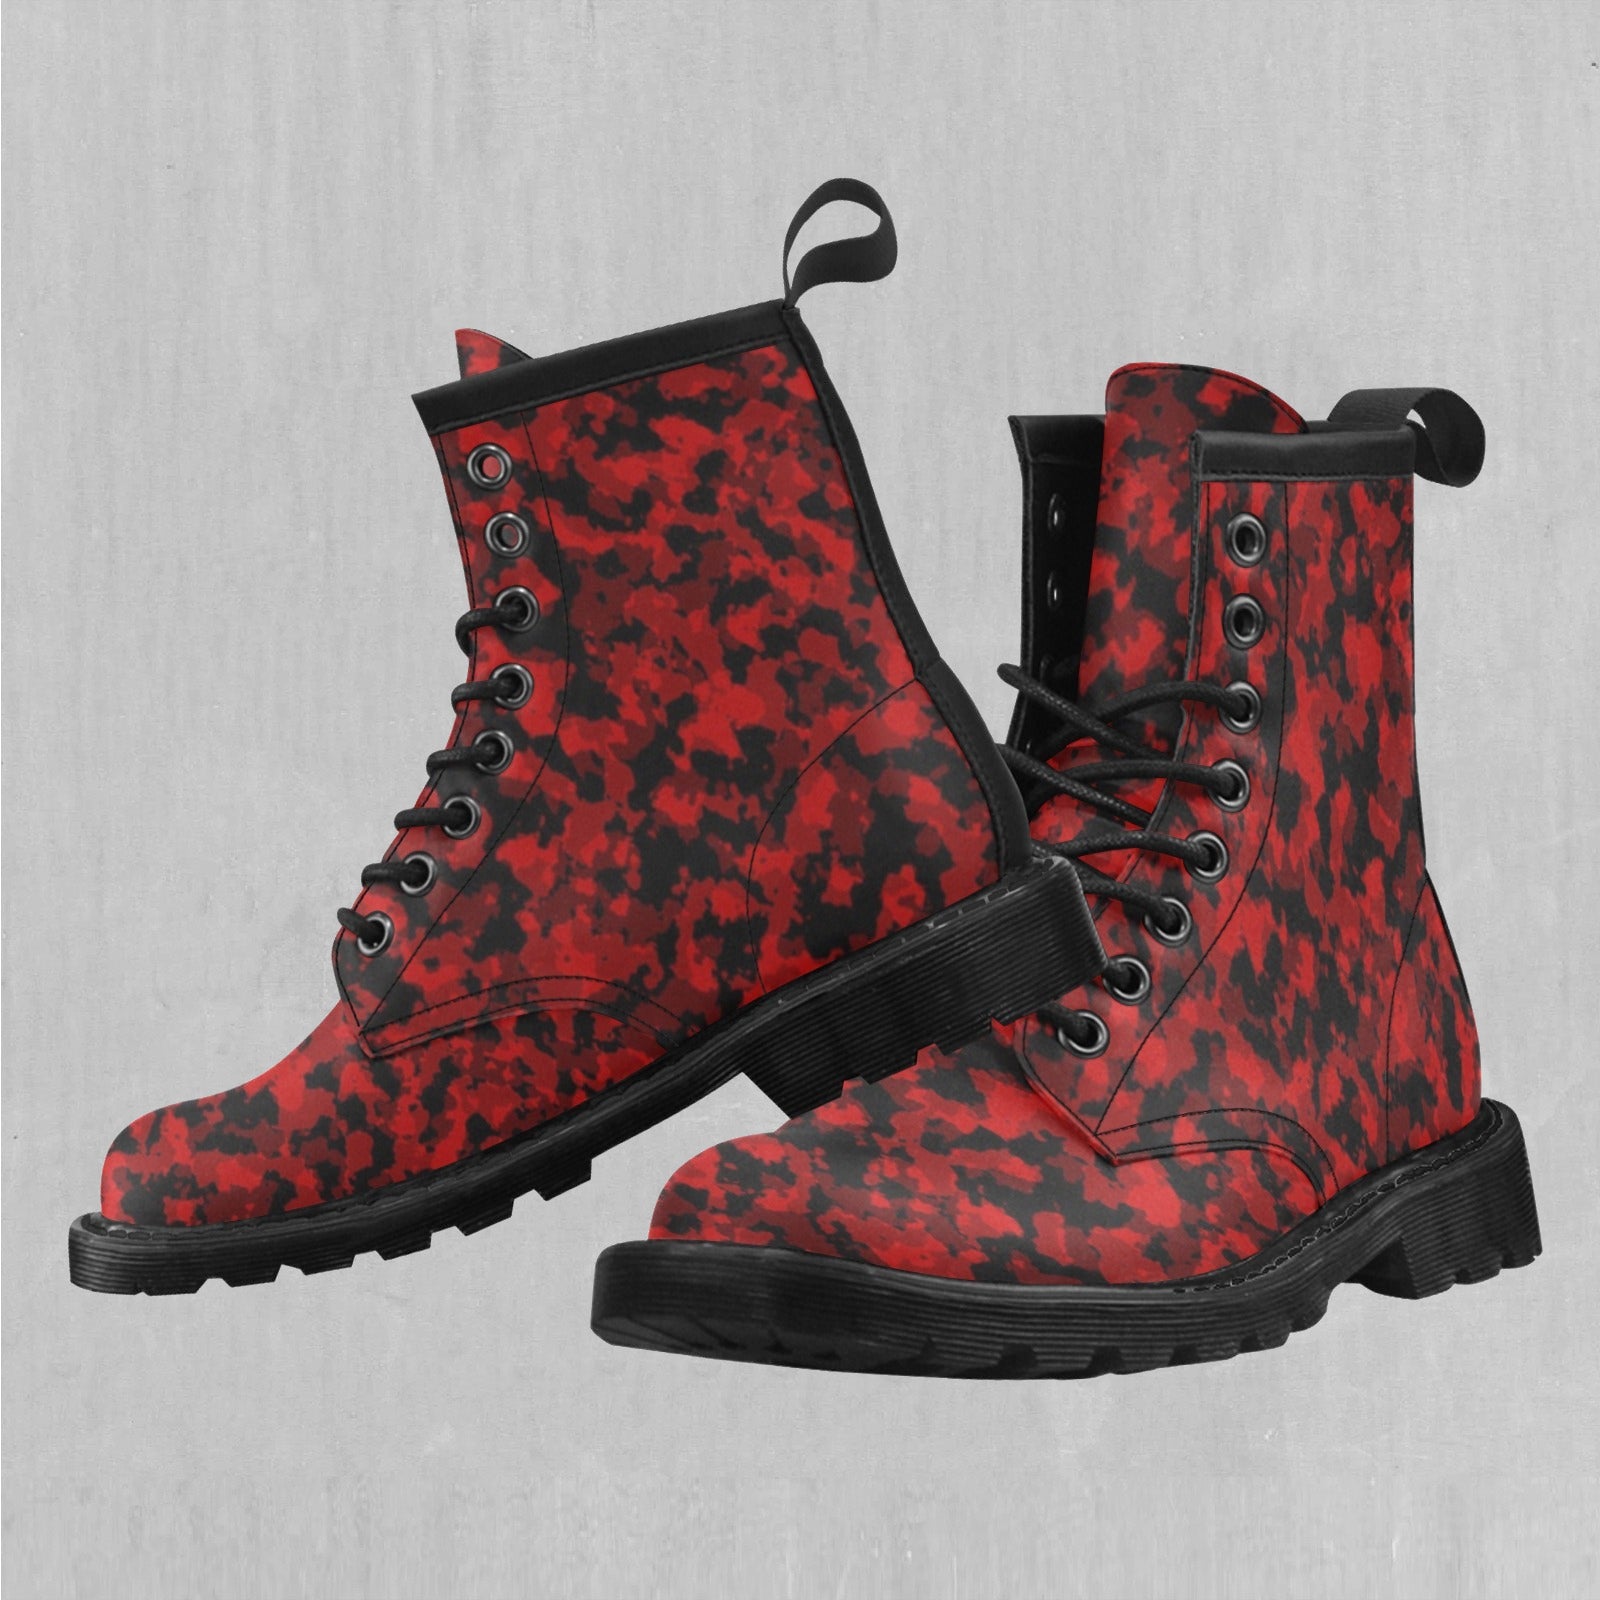 Cardinal Red Camo Women's Lace Up Boots